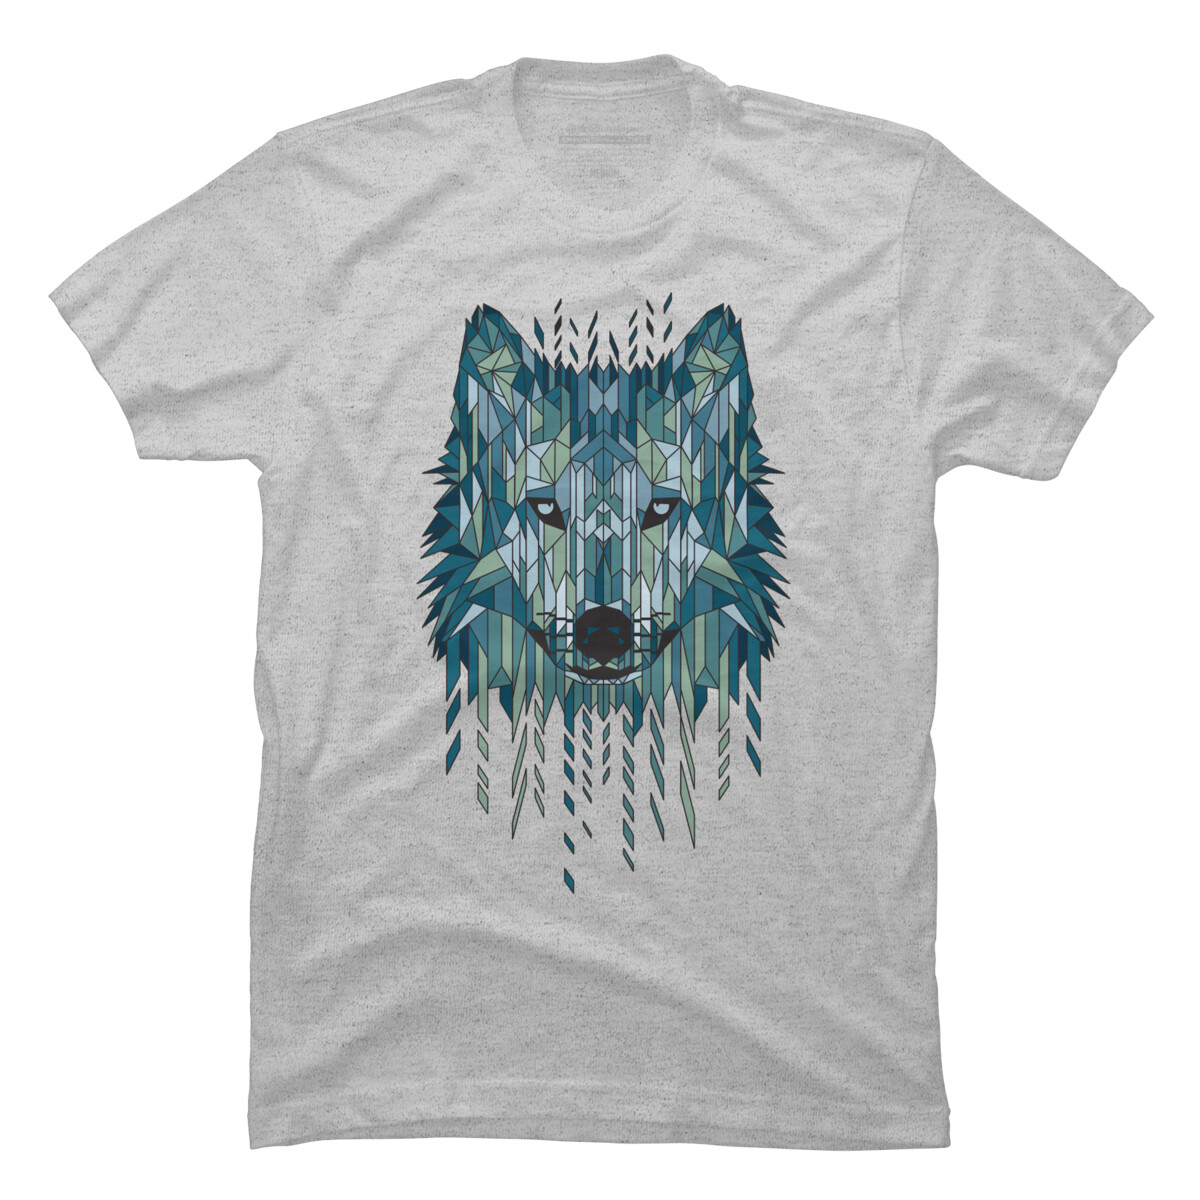 Geometric Wolf Mens Athletic Heather Cream Graphic Tee - Design By Humans  2XL - image 1 of 4